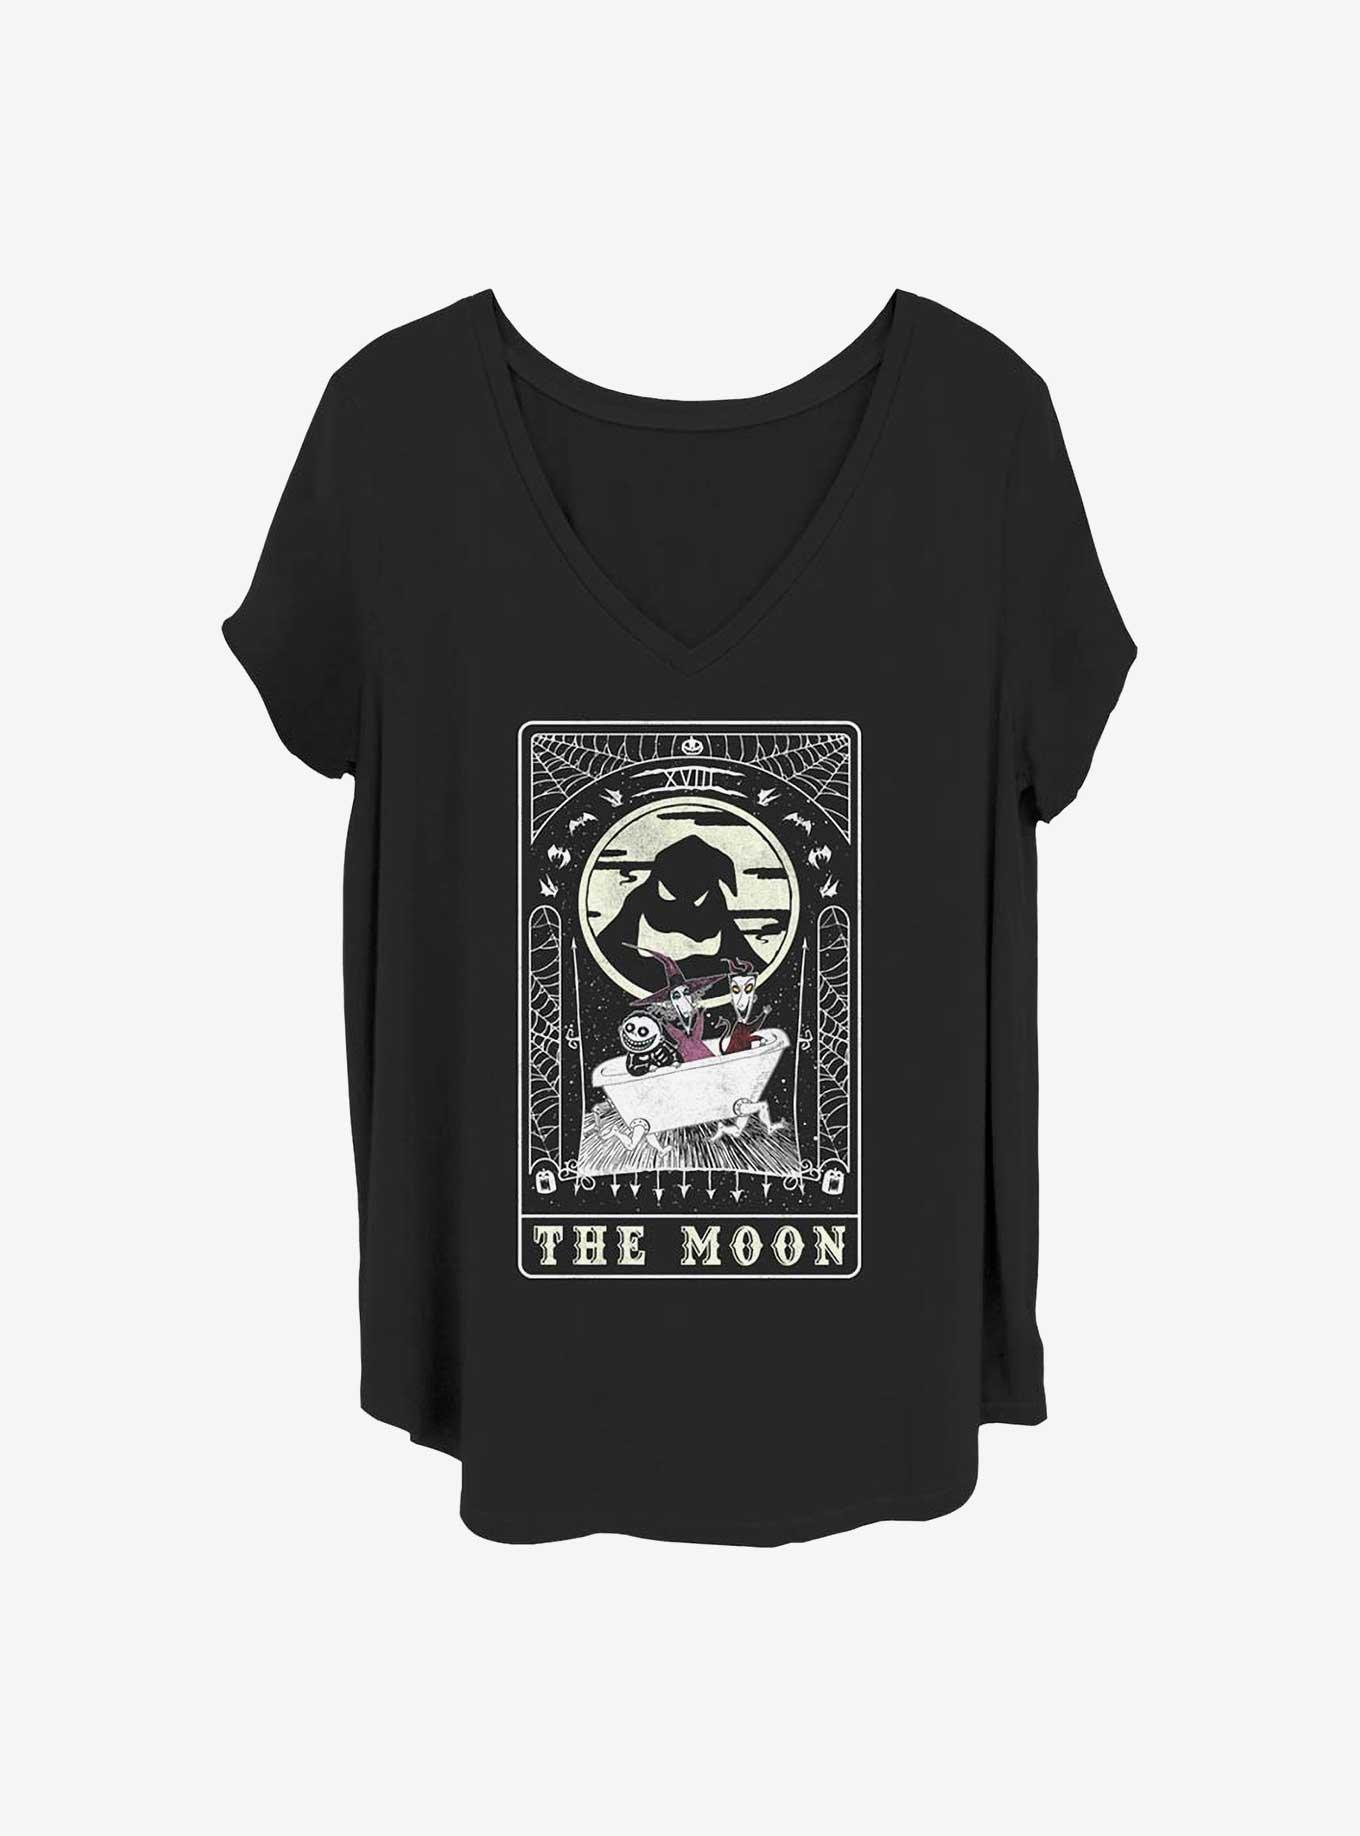 Disney The Nightmare Before Christmas The Moon Girls T-Shirt Plus Size, BLACK, hi-res